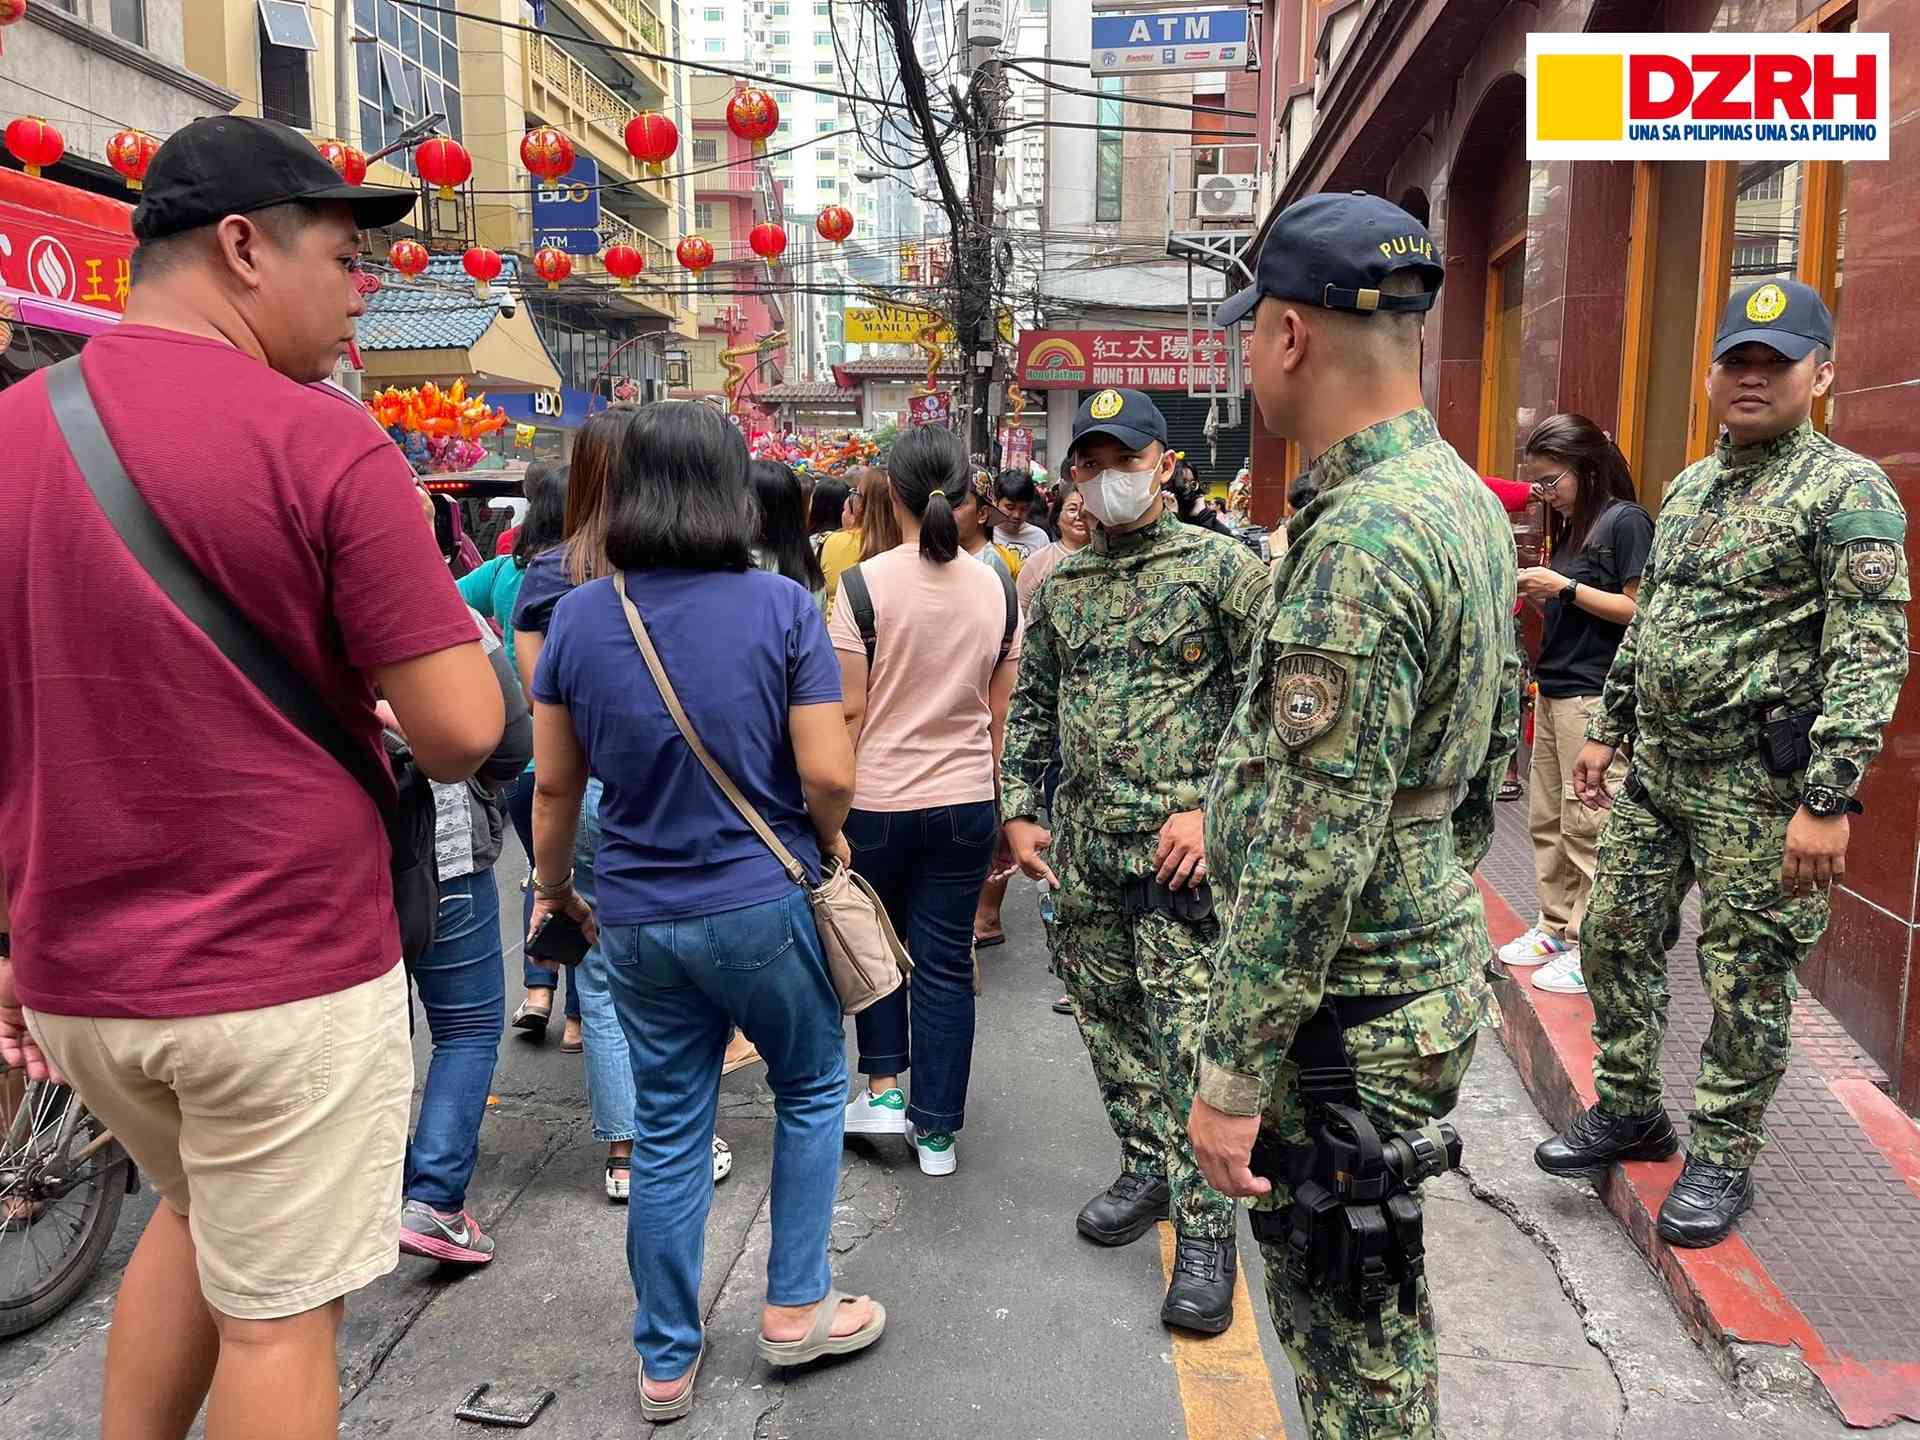 MPD deploys 1,500 personnel for Binondo's Chinese New Year celebration